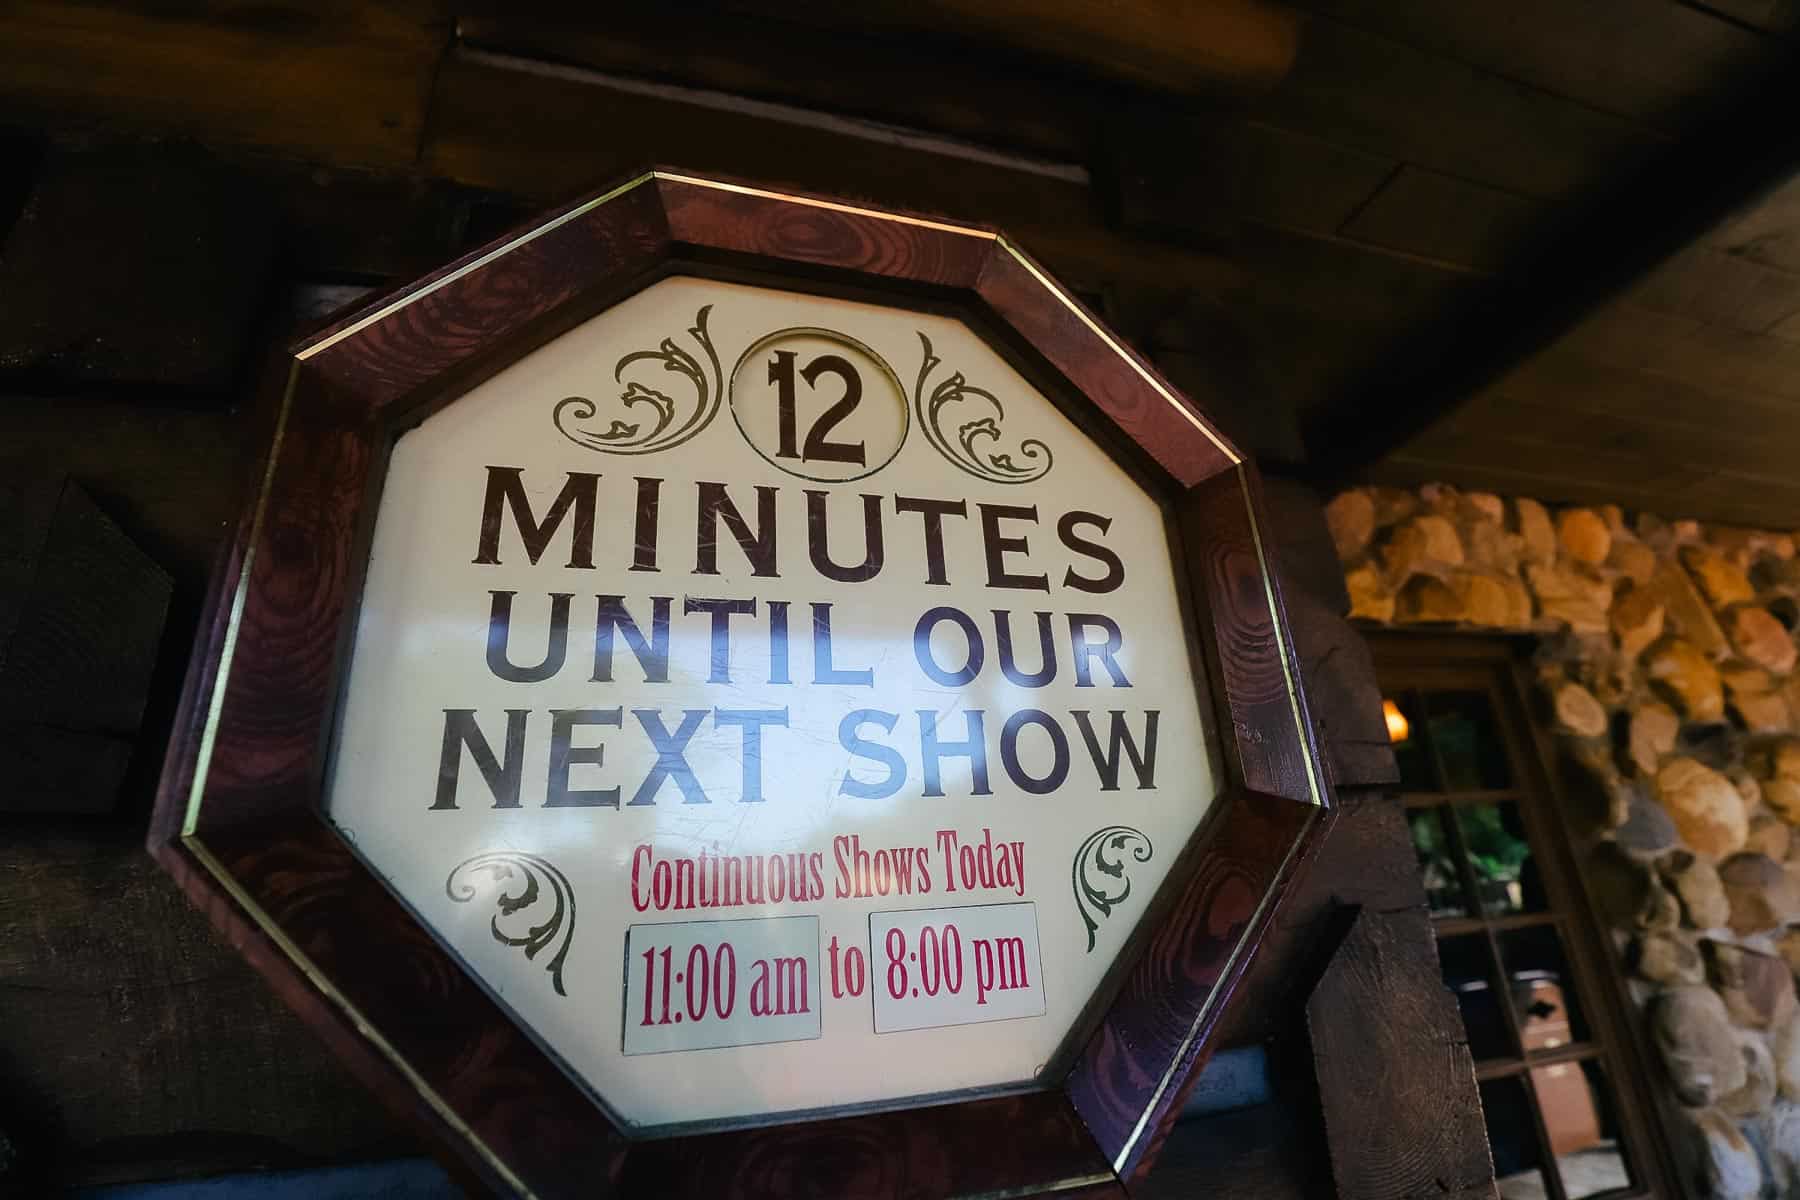 Signs reads 12 minutes until our next show. Continuous shows today between 11:00 a.m. and 8:00 p.m. 